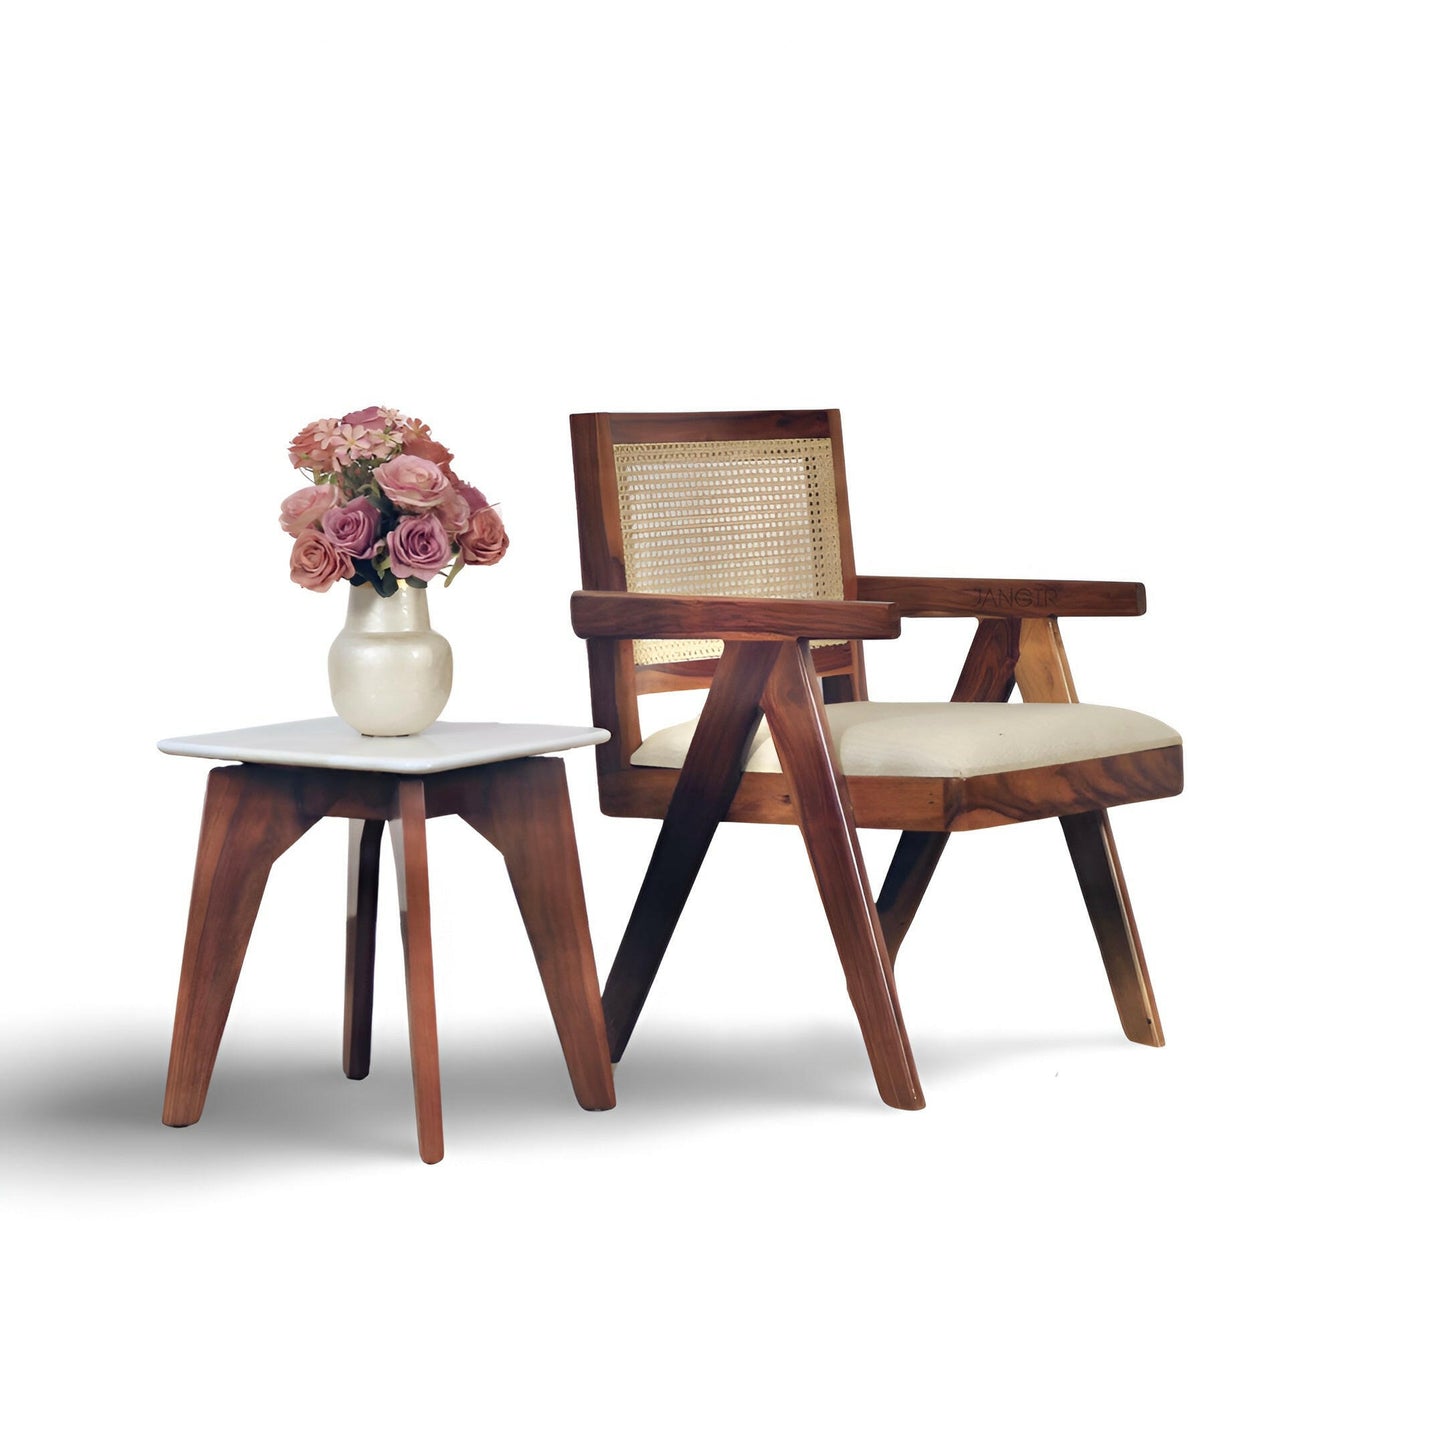 Enhance your living room with our exquisite collection of wooden cane chairs. Crafted from durable sheesham wood, our wooden easy chairs combine comfort and style with wicker. Explore our range now!